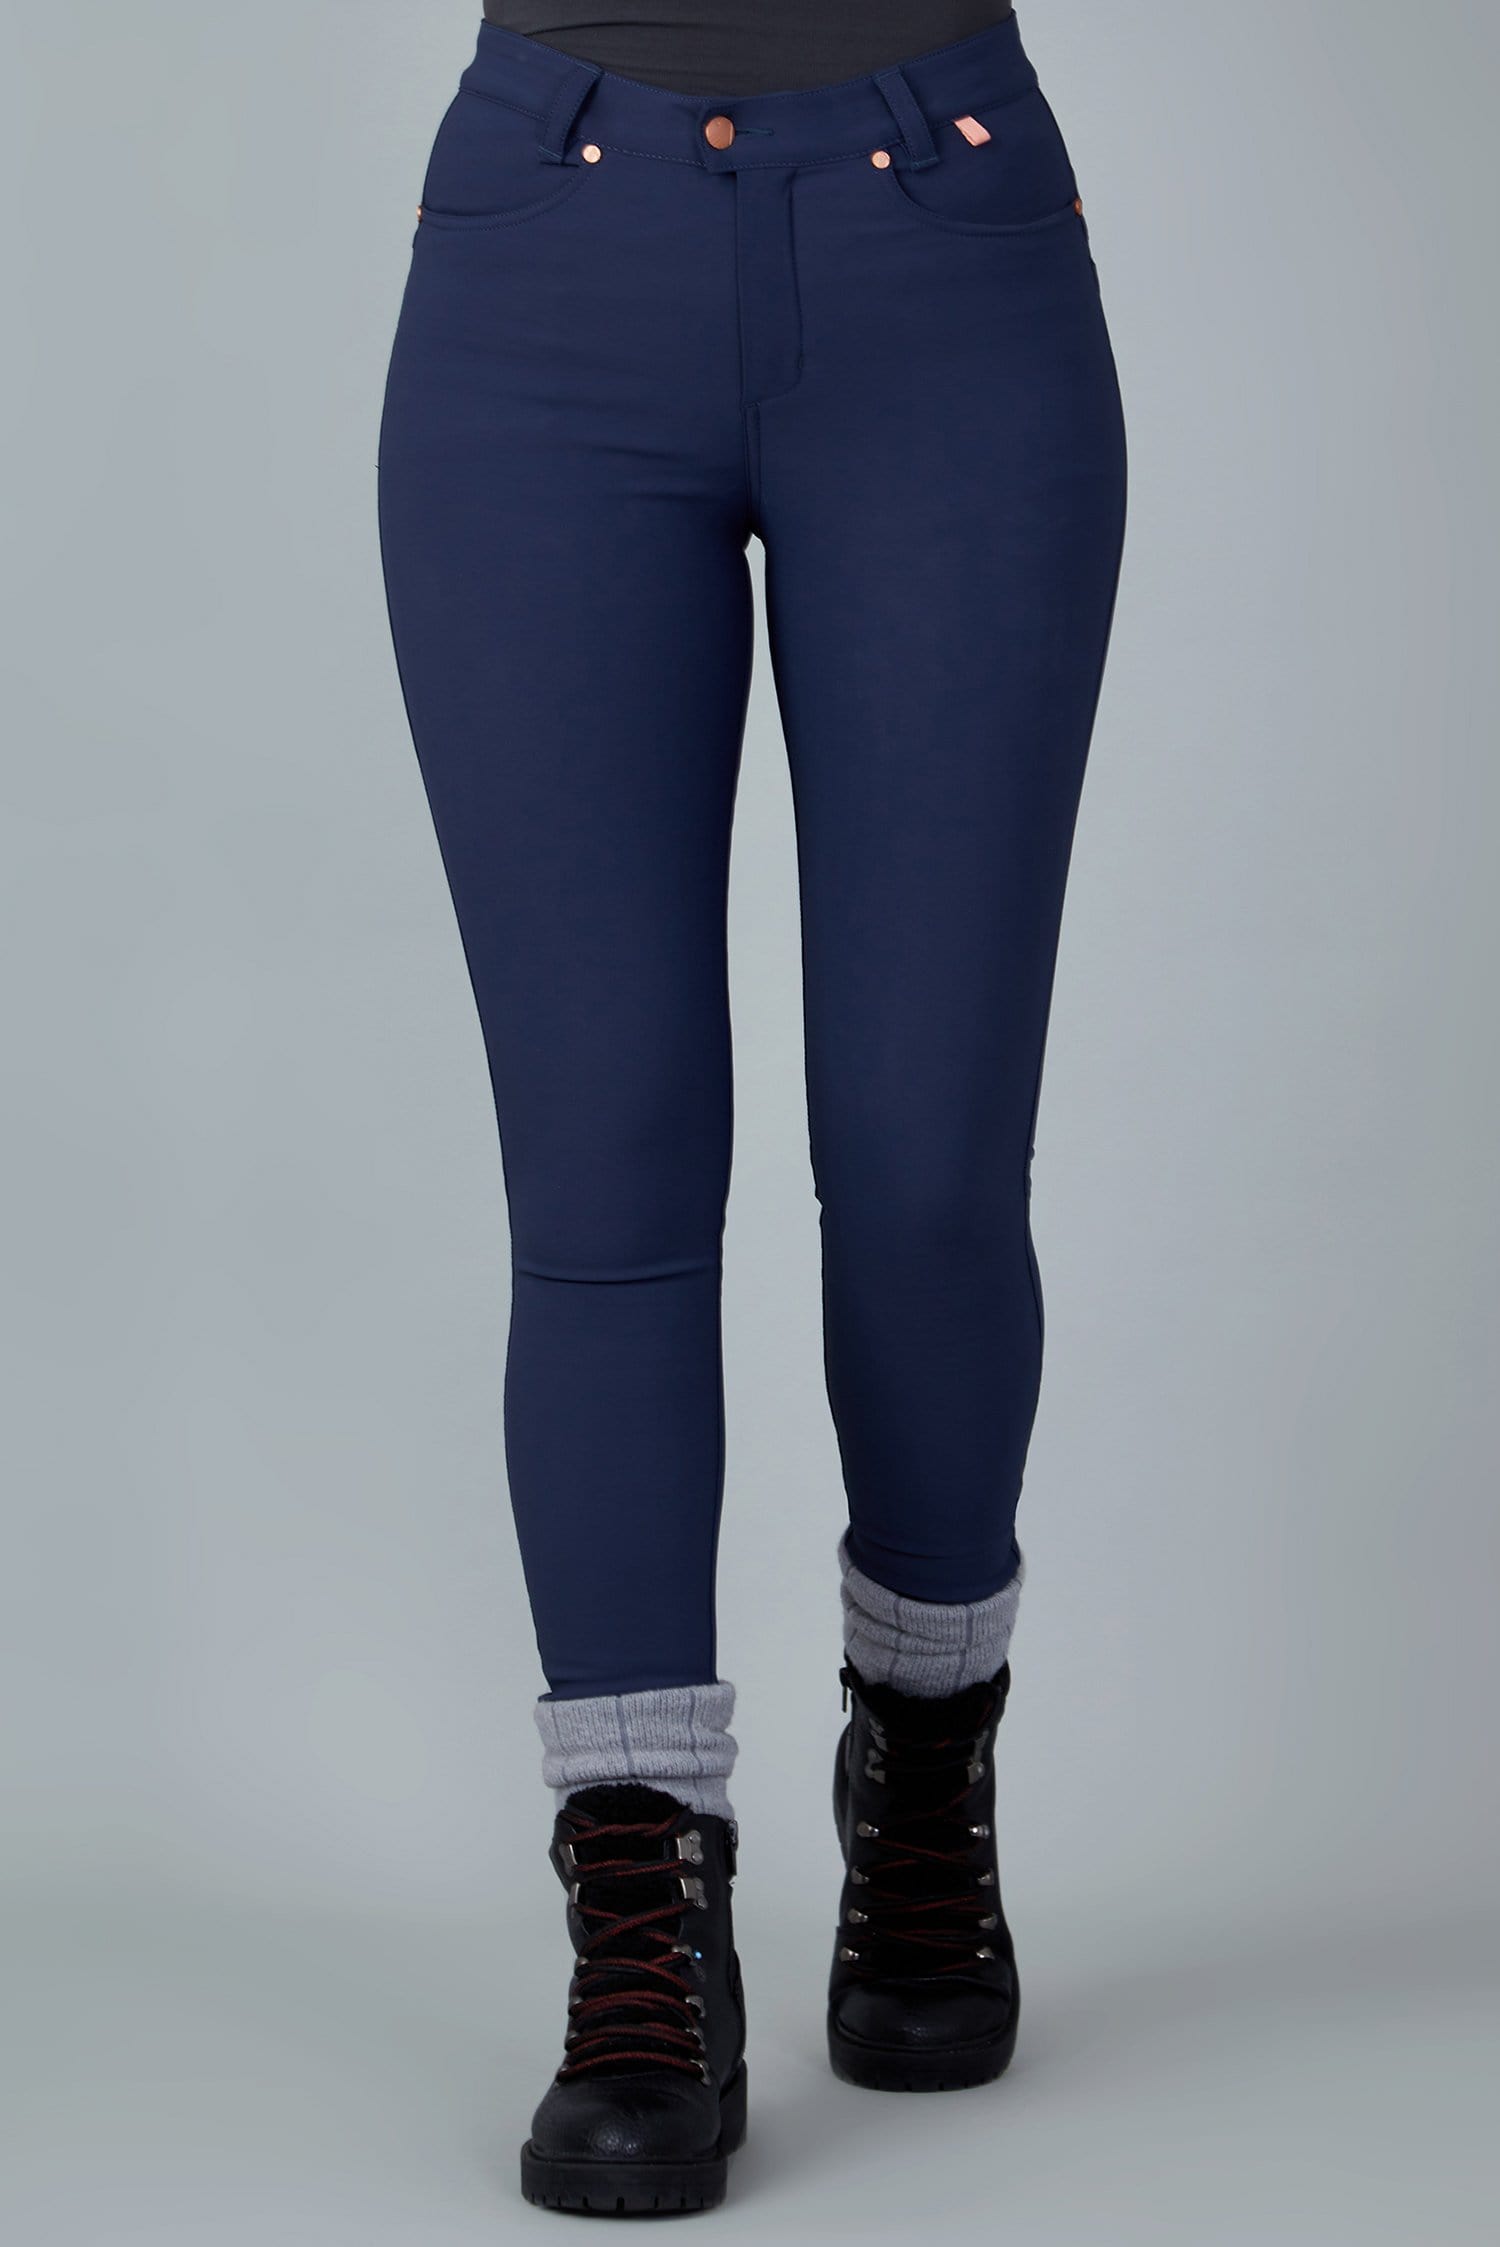 The Aventurite Stretch Skinny Outdoor Trousers - Midnight Blue - 34r / Uk16 - Womens - Acai Outdoorwear